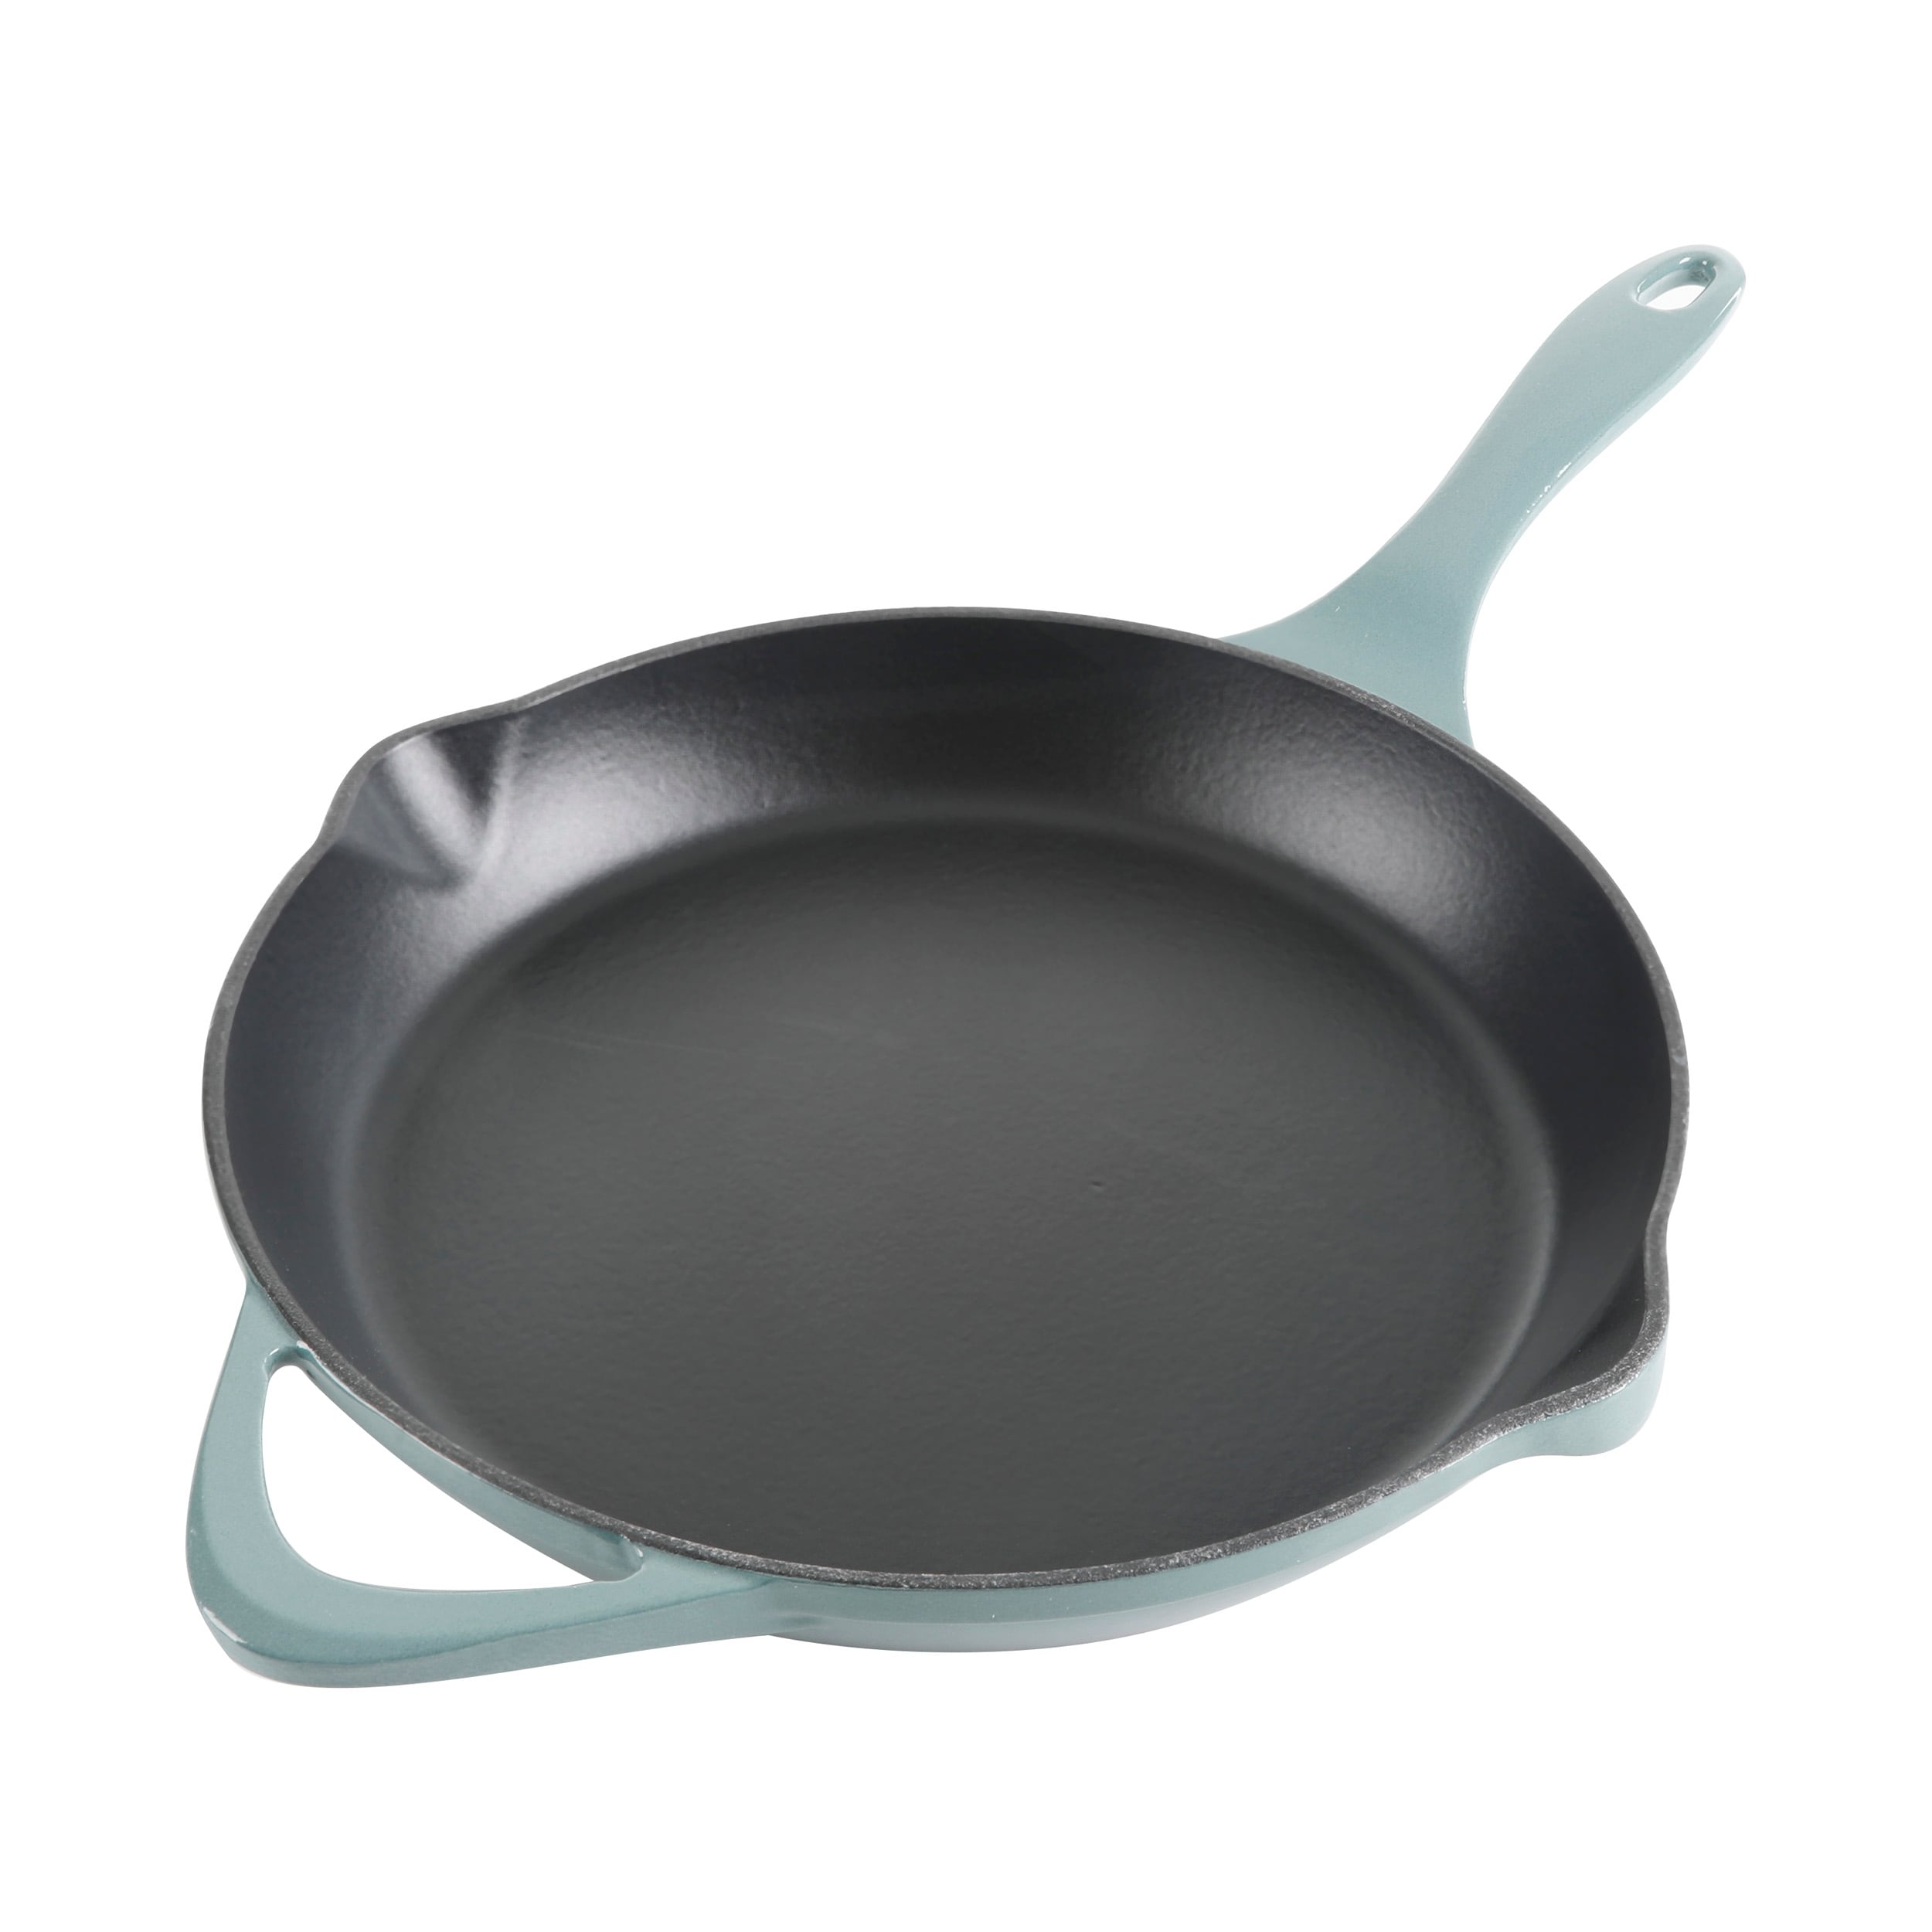 https://ak1.ostkcdn.com/images/products/is/images/direct/decc190aea6df6cffb01213ee90e5debfa47b228/Cravings-By-Chrissy-Teigen-11In-Enameled-Cast-Iron-Skillet-in-Green.jpg